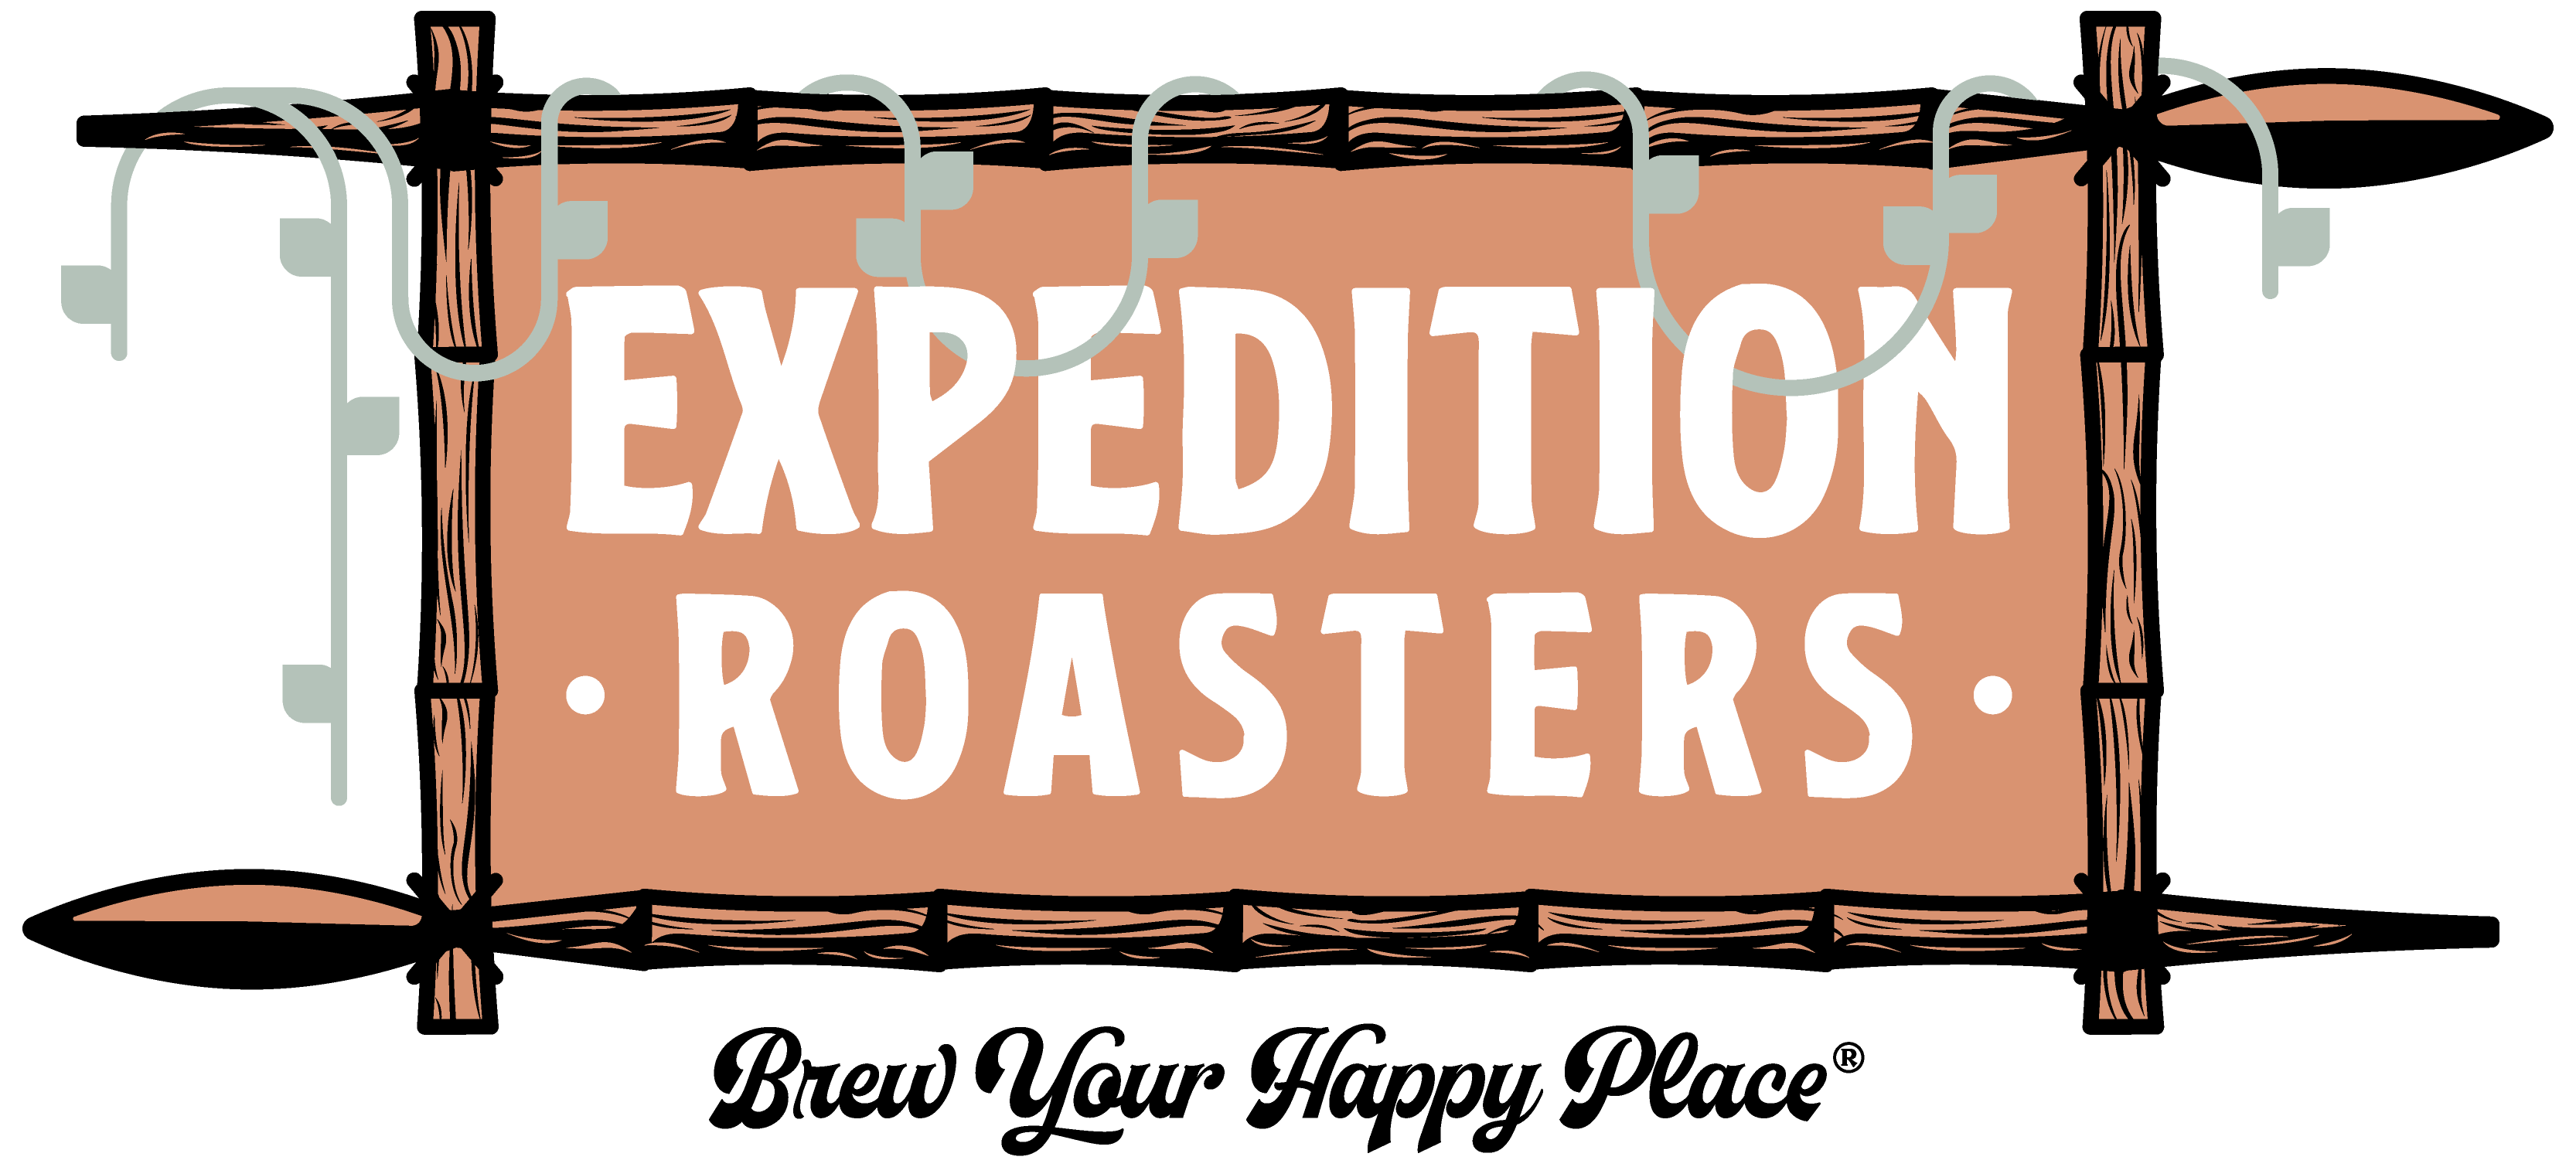 Expedition_Roasters_Colored_-_Transparent_-_Light_Background_Print-01_1_.png